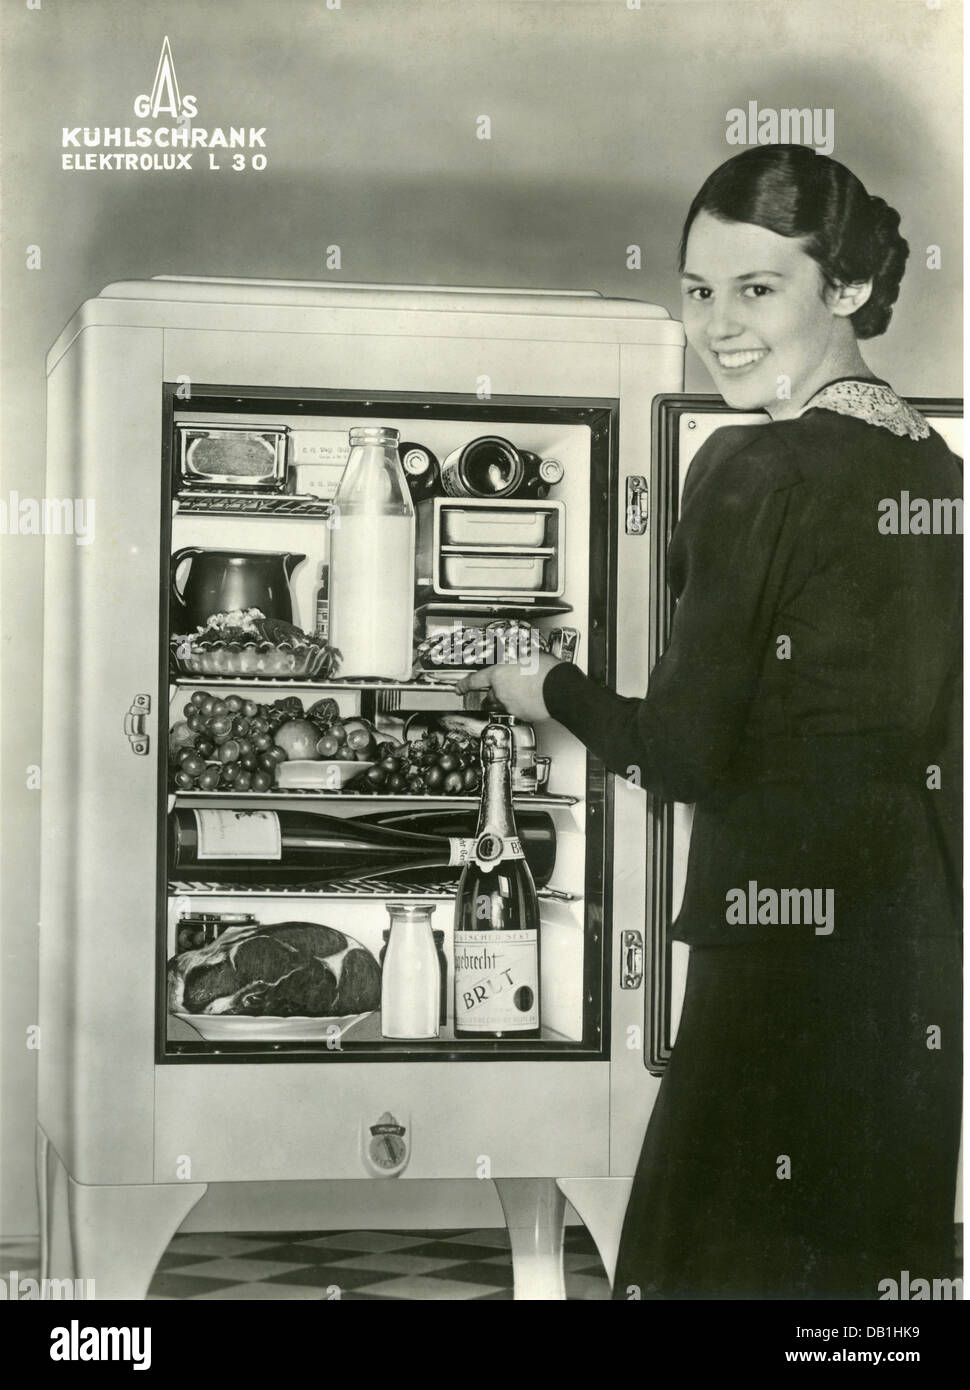 household,refrigerator,advertising for gas powered refrigerator Elektrolux L 30,housewife at open refrigerator,Germany,1937,opened,open,luxury,luxuries,gas,fluid,gases,cooling,cool,store,stores,store up,supply,household,households,kitchen,kitchens,technical progress,technological advance,household appliance,domestic appliance,household utensil,household appliances,domestic appliances,household utensils,advertising,smile,smiles,30s,1930s,kitchen appliance,kitchen device,kitchen utensil,kitchen furniture,freshness,fresh,f,Additional-Rights-Clearences-Not Available Stock Photo